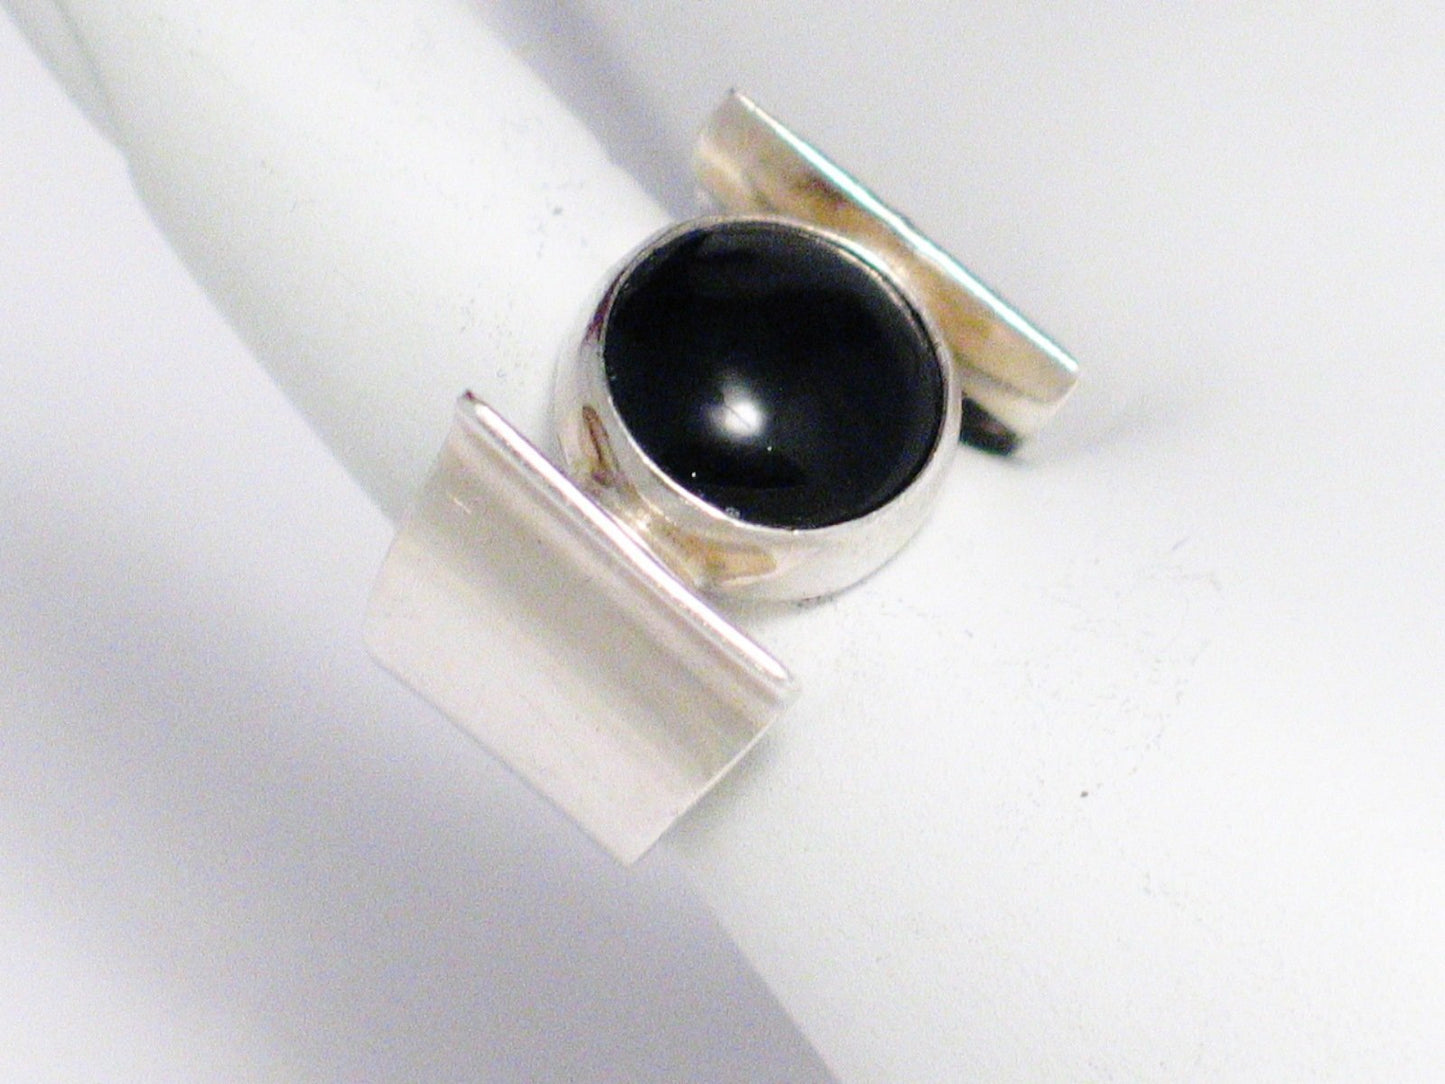 Womenswear Ring | Sterling Silver Floating Jet Black Onyx Stone Ring | Estate Jewelry online at Blingschlingers